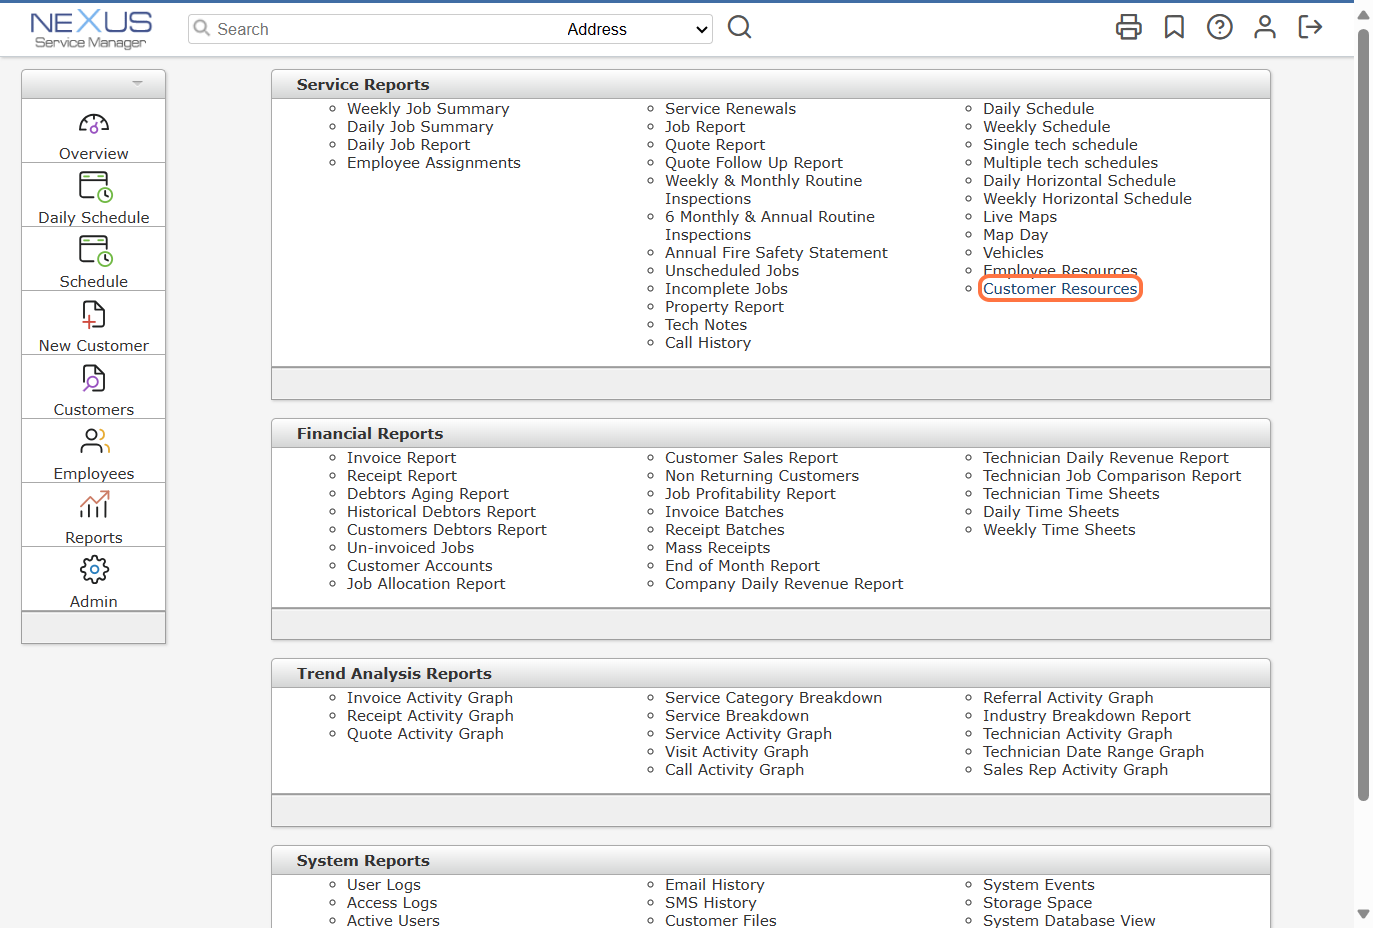 Click on Customer Resources beneath Service Reports.